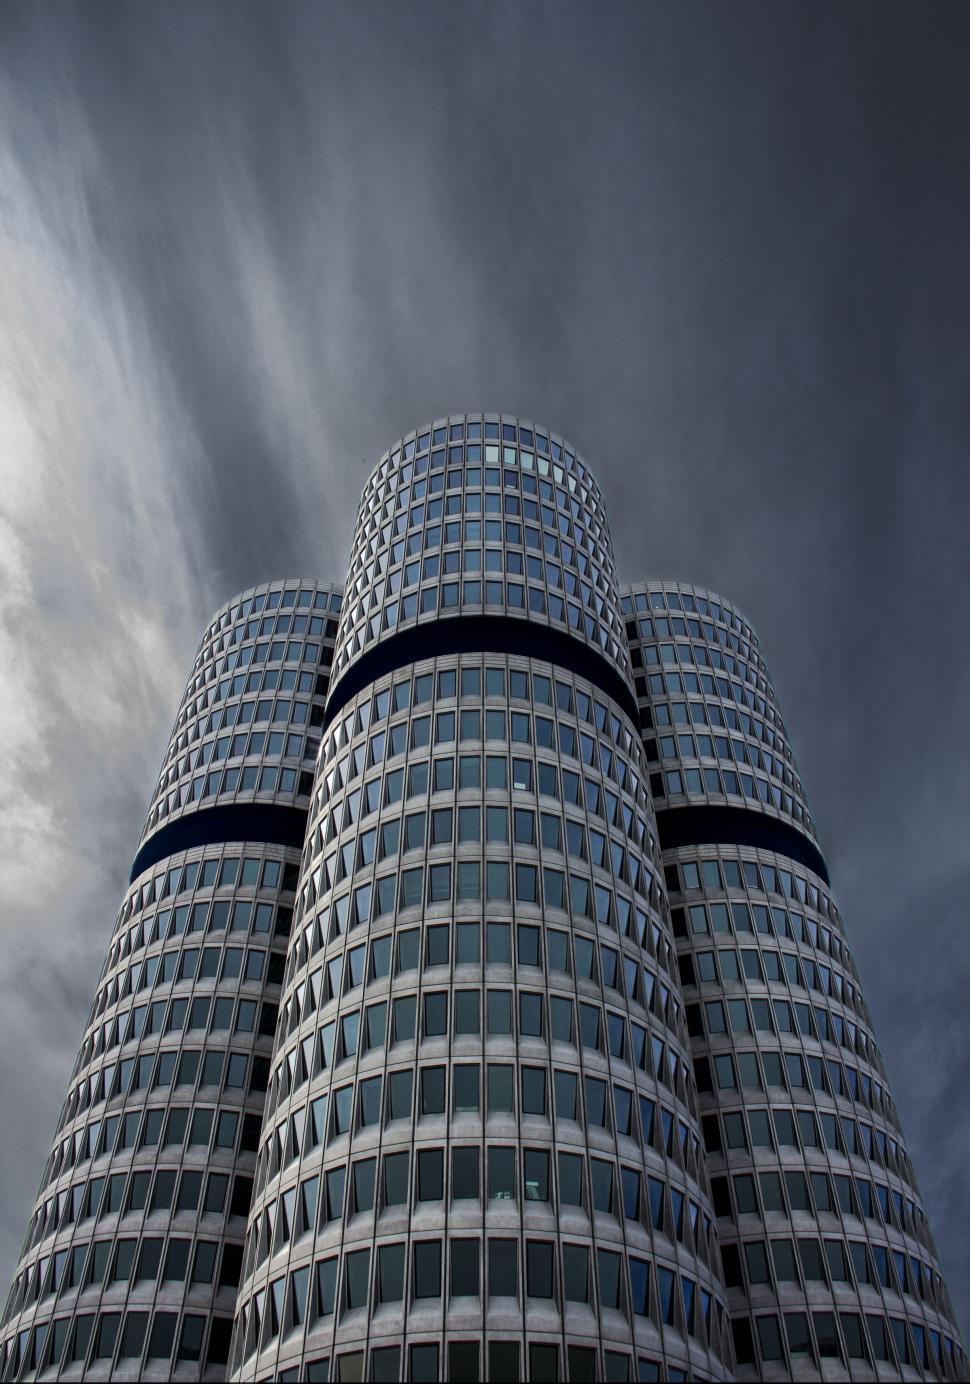 Free Image of Tall Building With Many Windows Under Cloudy Sky 